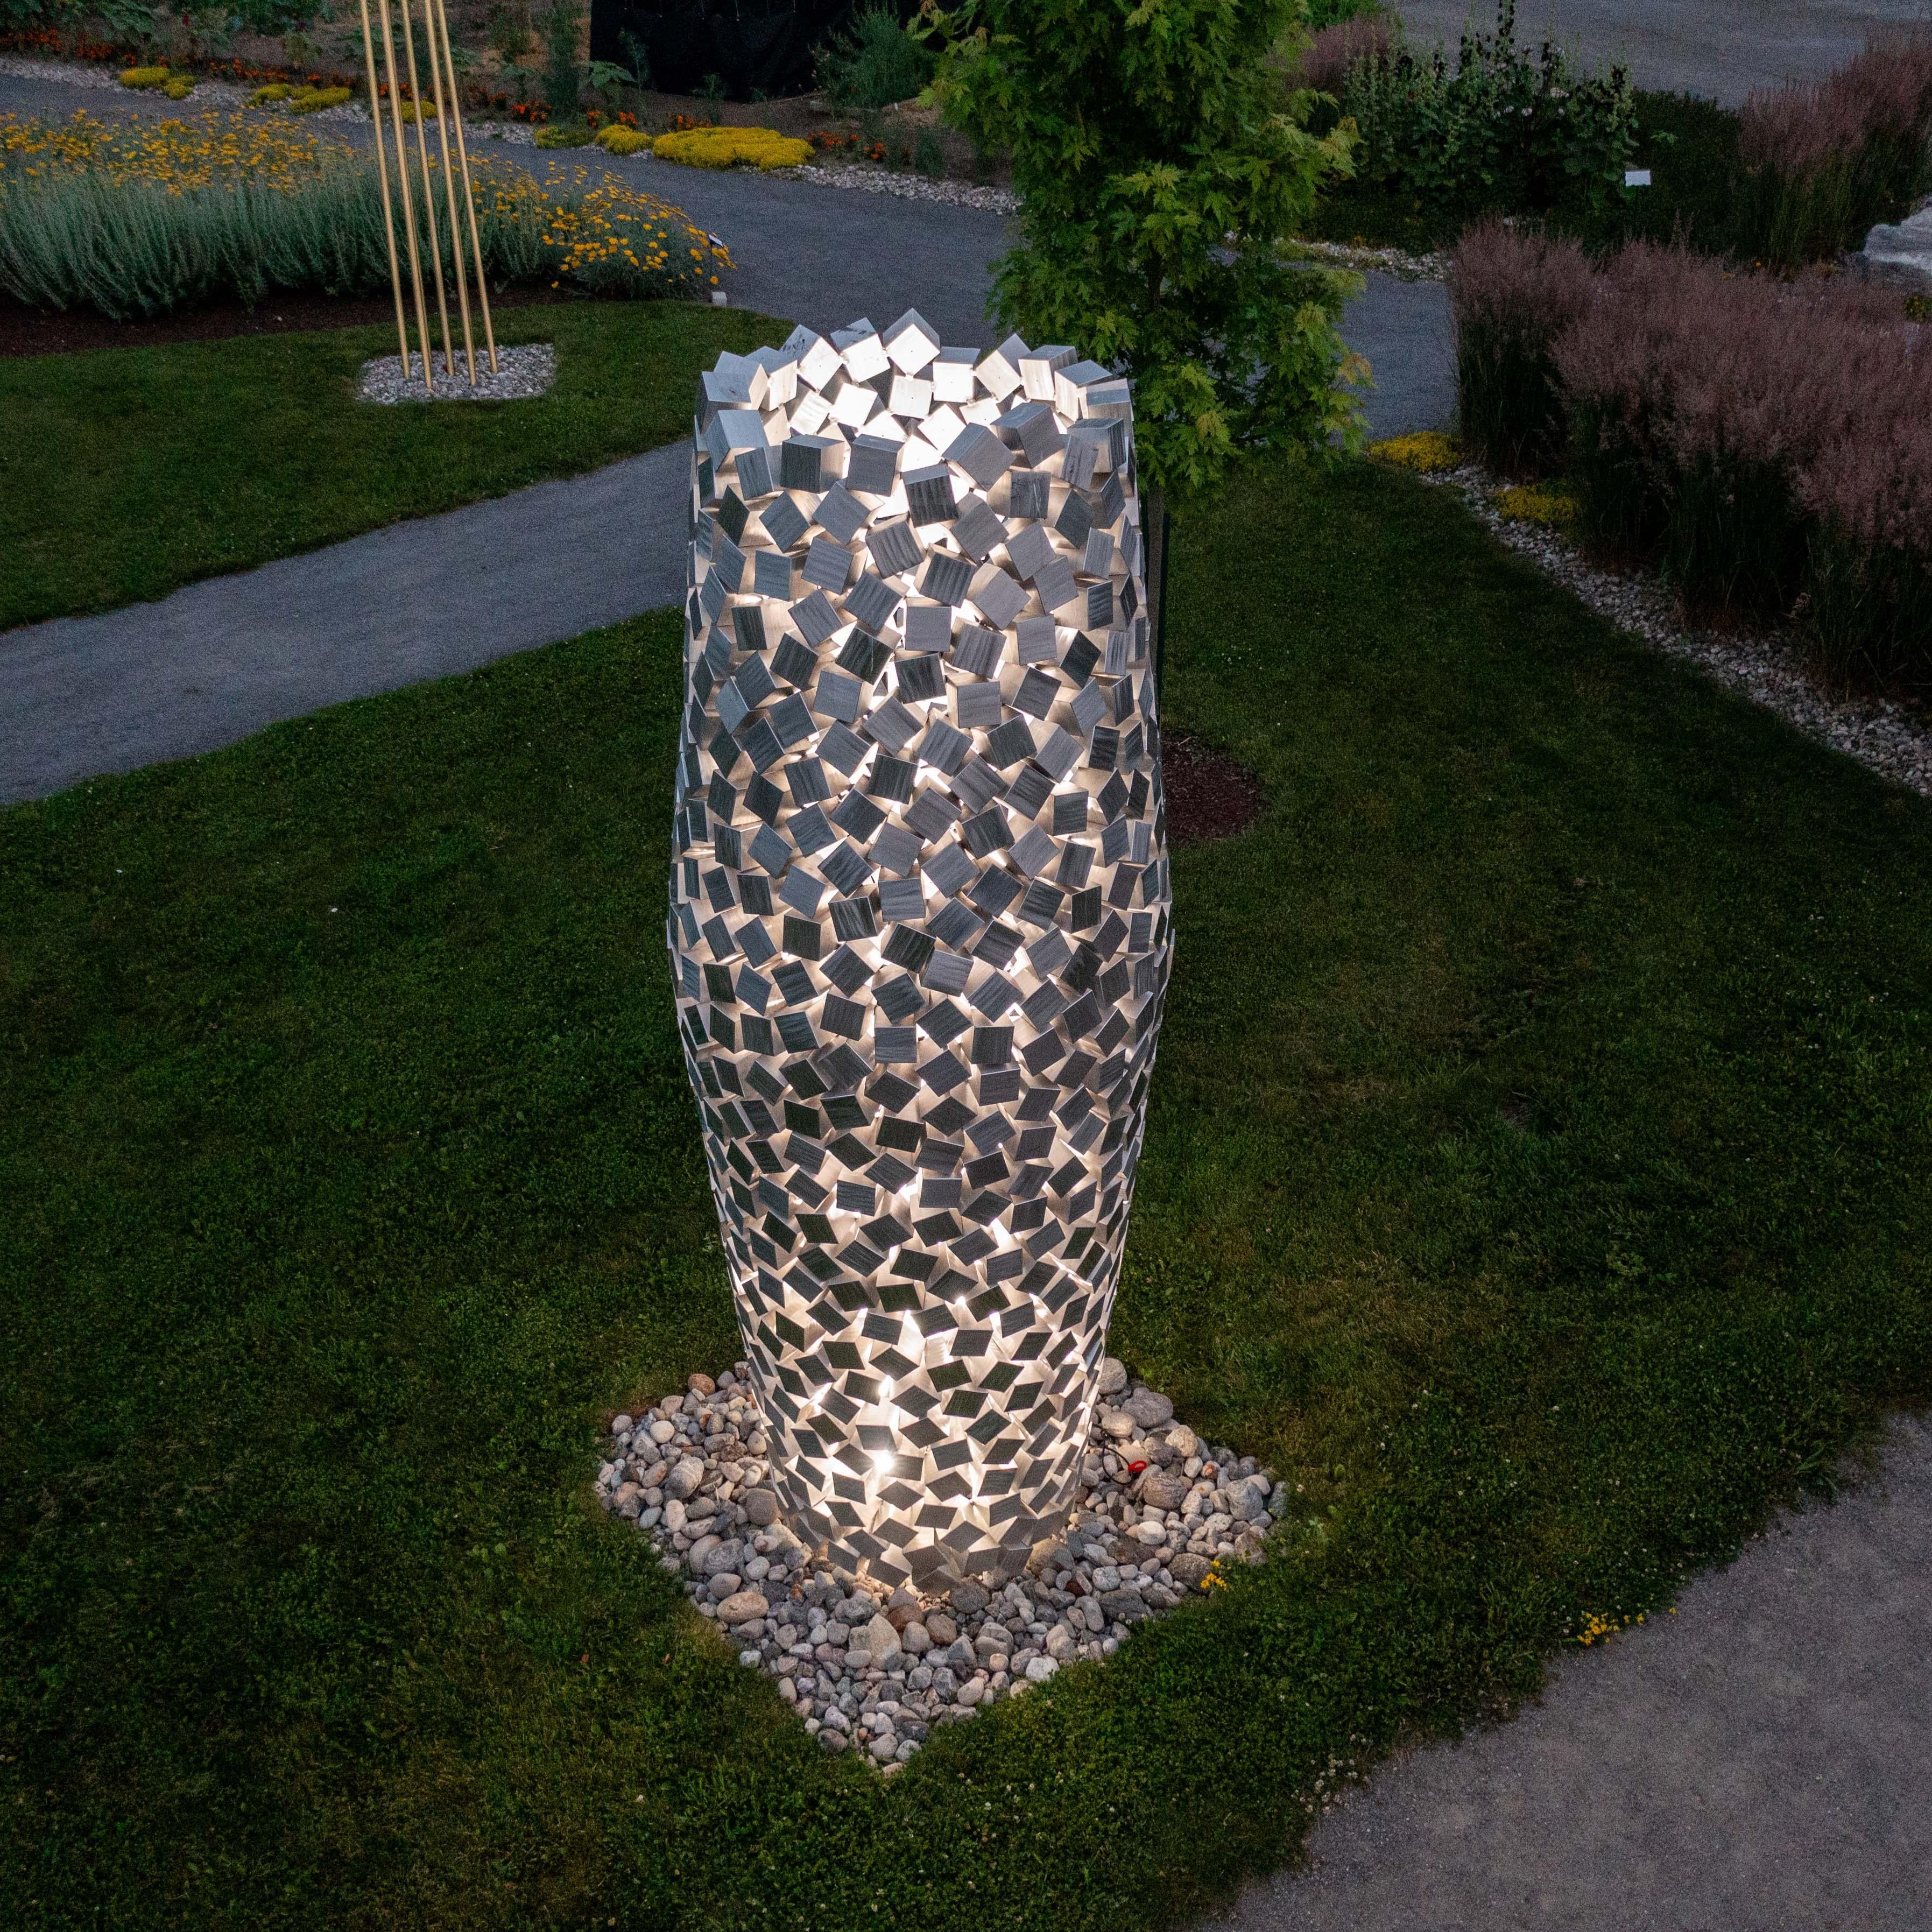 Cones 690 - tall, geometric abstract, polished aluminum outdoor sculpture For Sale 12